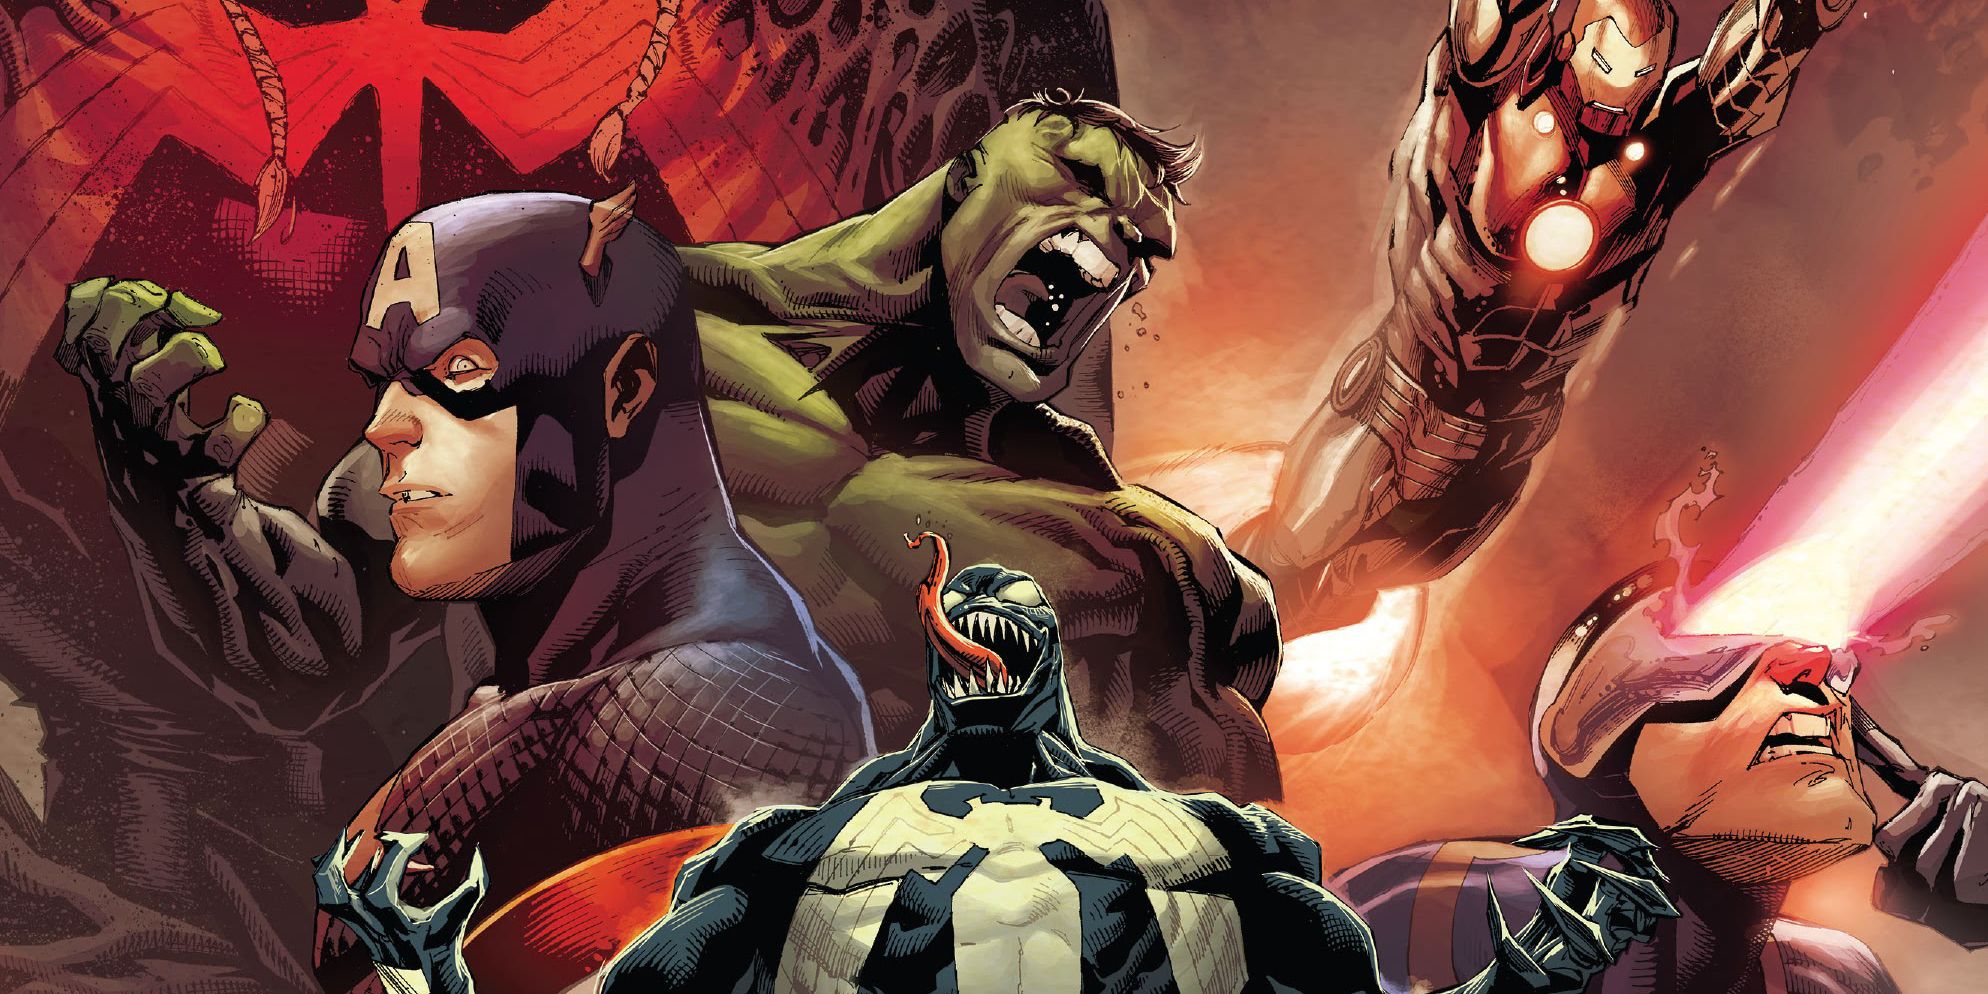 Venom, Cyclops, and the Avengers ready to fight Knull King in Black